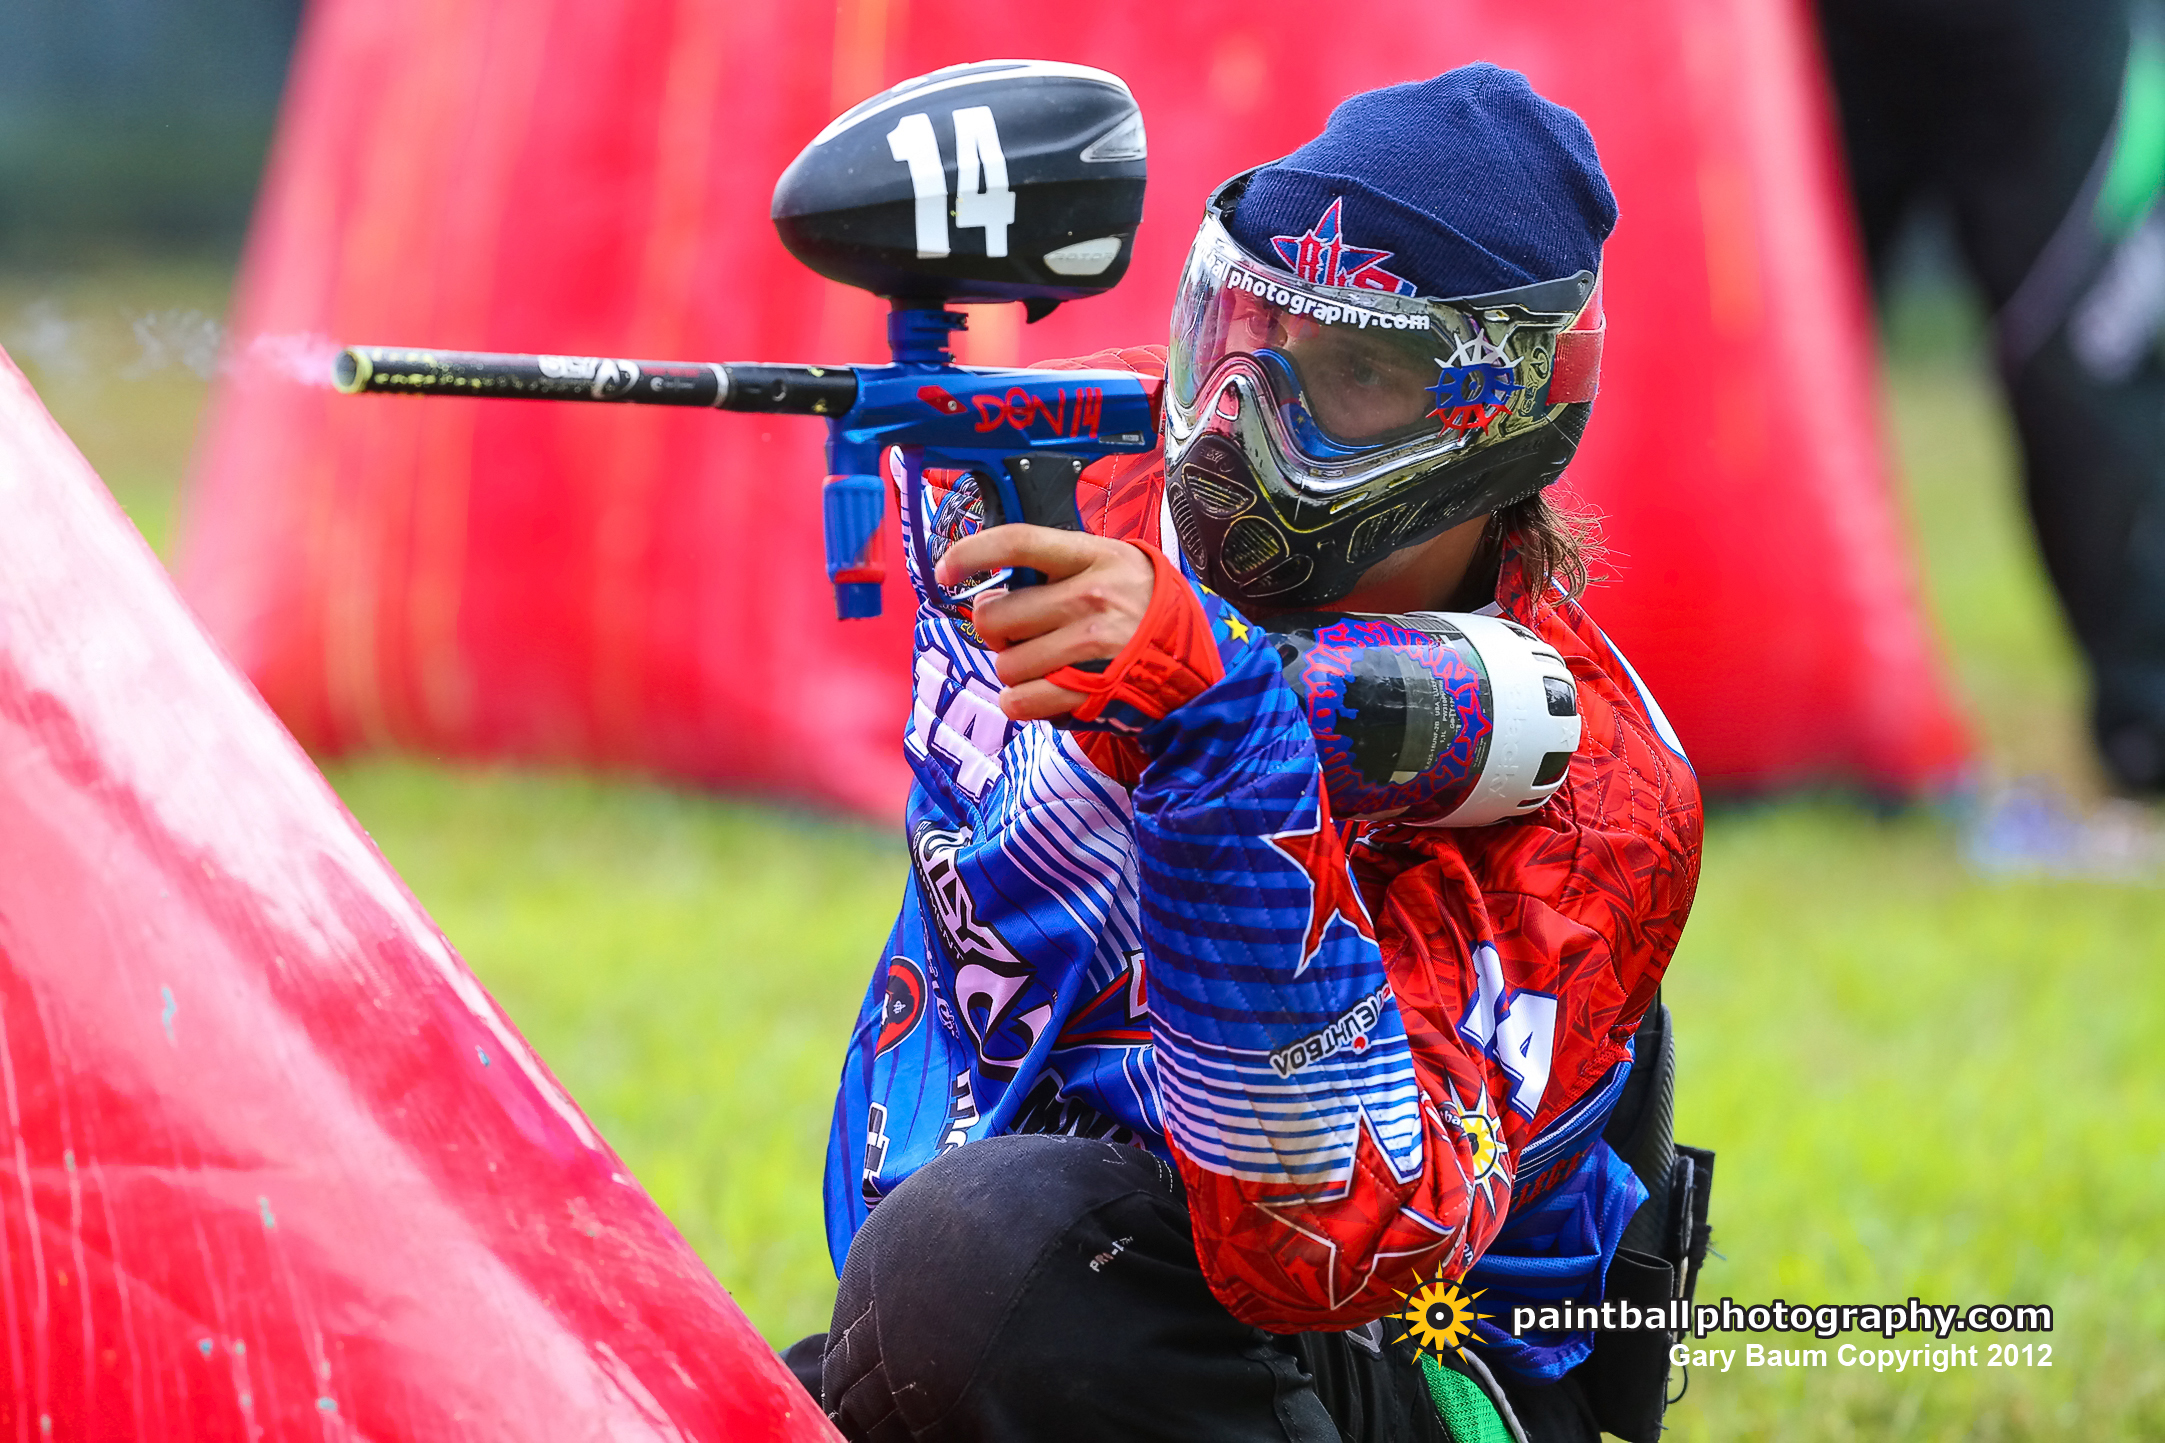 The weather held up this past weekend, which made for some great paintball ...